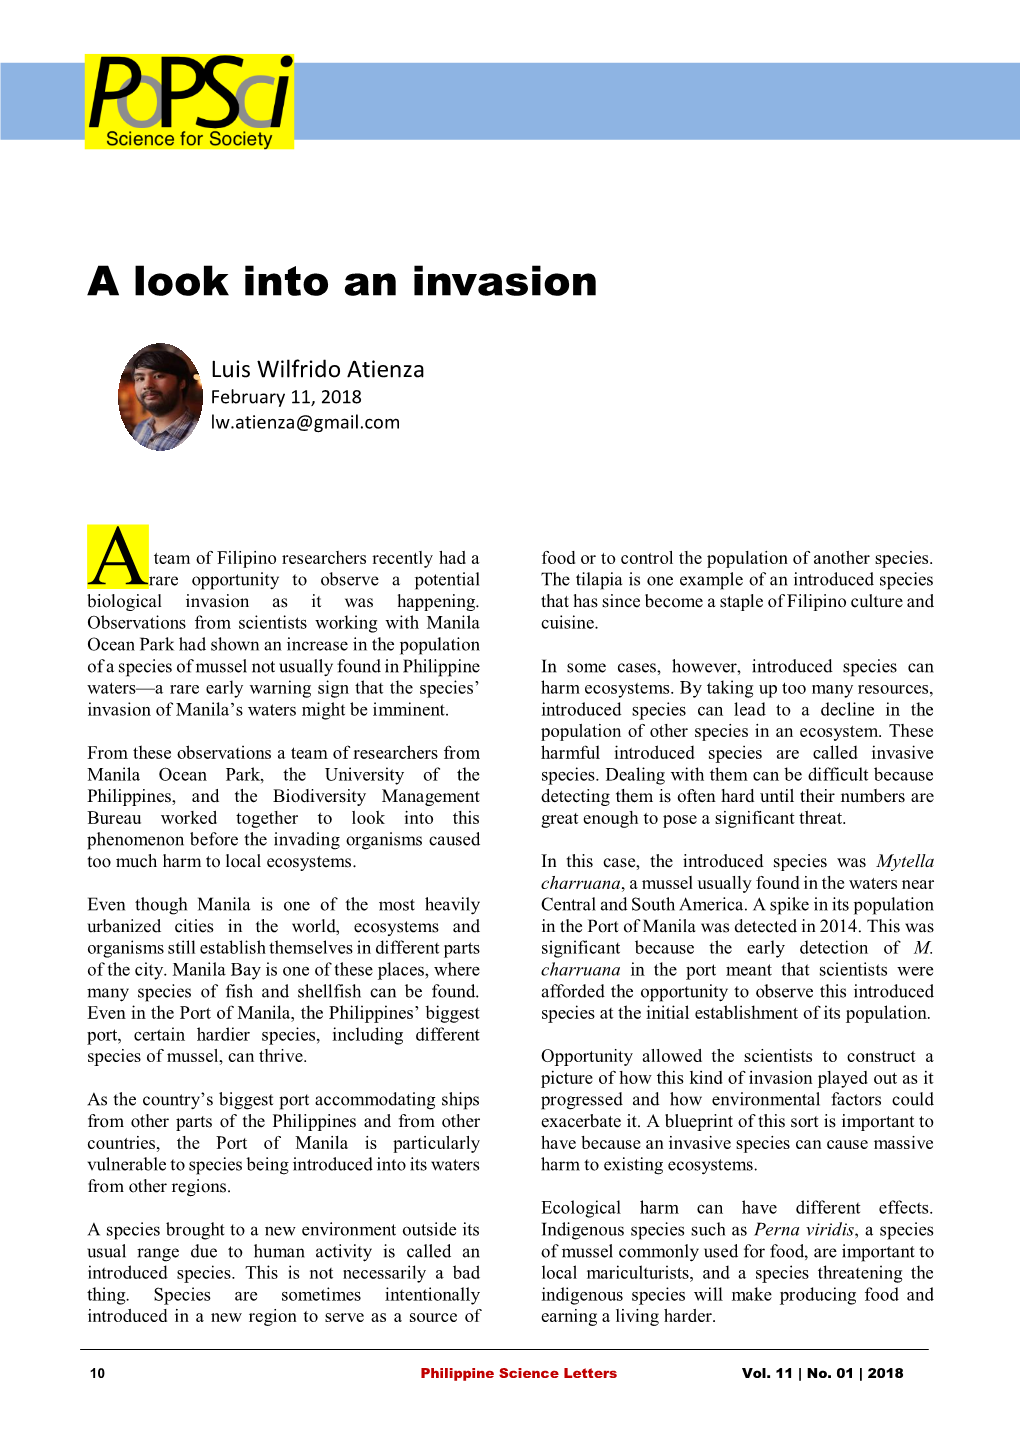 A Look Into an Invasion